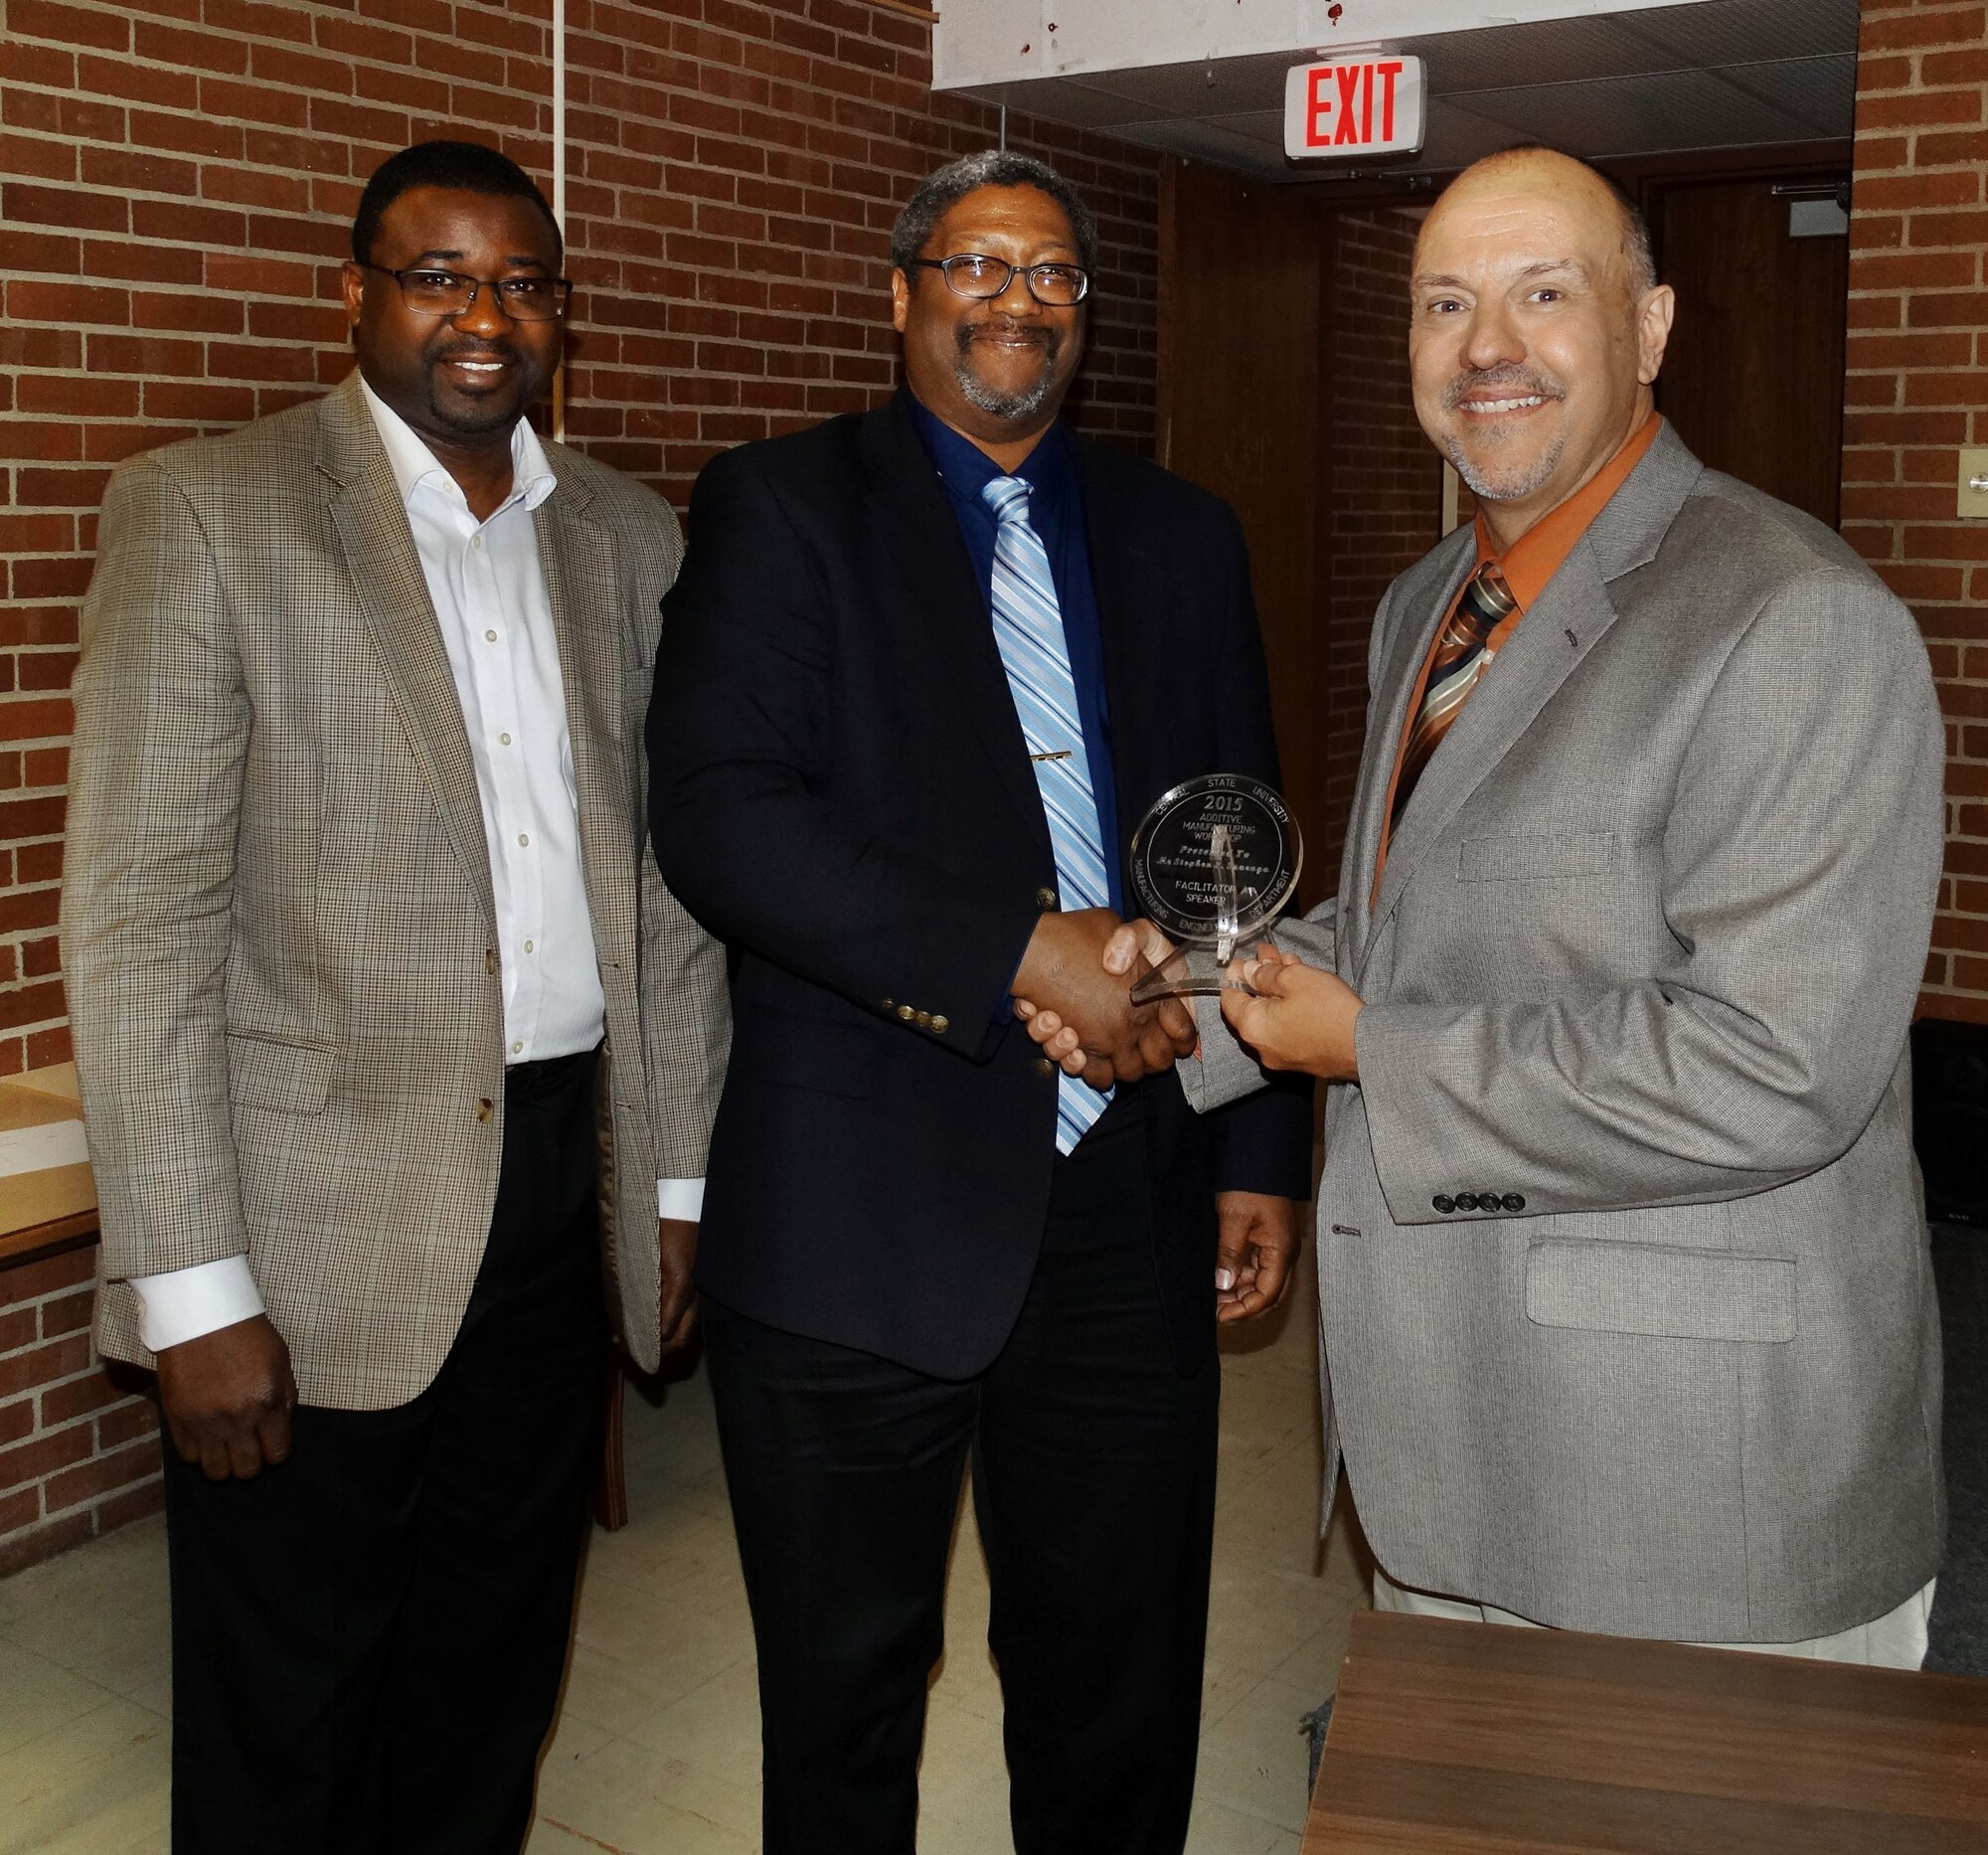 Stephen Szaruga (right), Chief Engineer of the Manufacturing and Industrial Technologies Divison of the AFRL Materials and Manufacturing Directorate, is presented a memento by Dr. Abiodun Fasoro (left) and Dr. Augustus Morris of Central State University. Szaruga spoke to attendees at the March 5, 2015 Additive Manufacturing Workshop. (Photo by Tobey Cordell. Universal Technology Corporation)